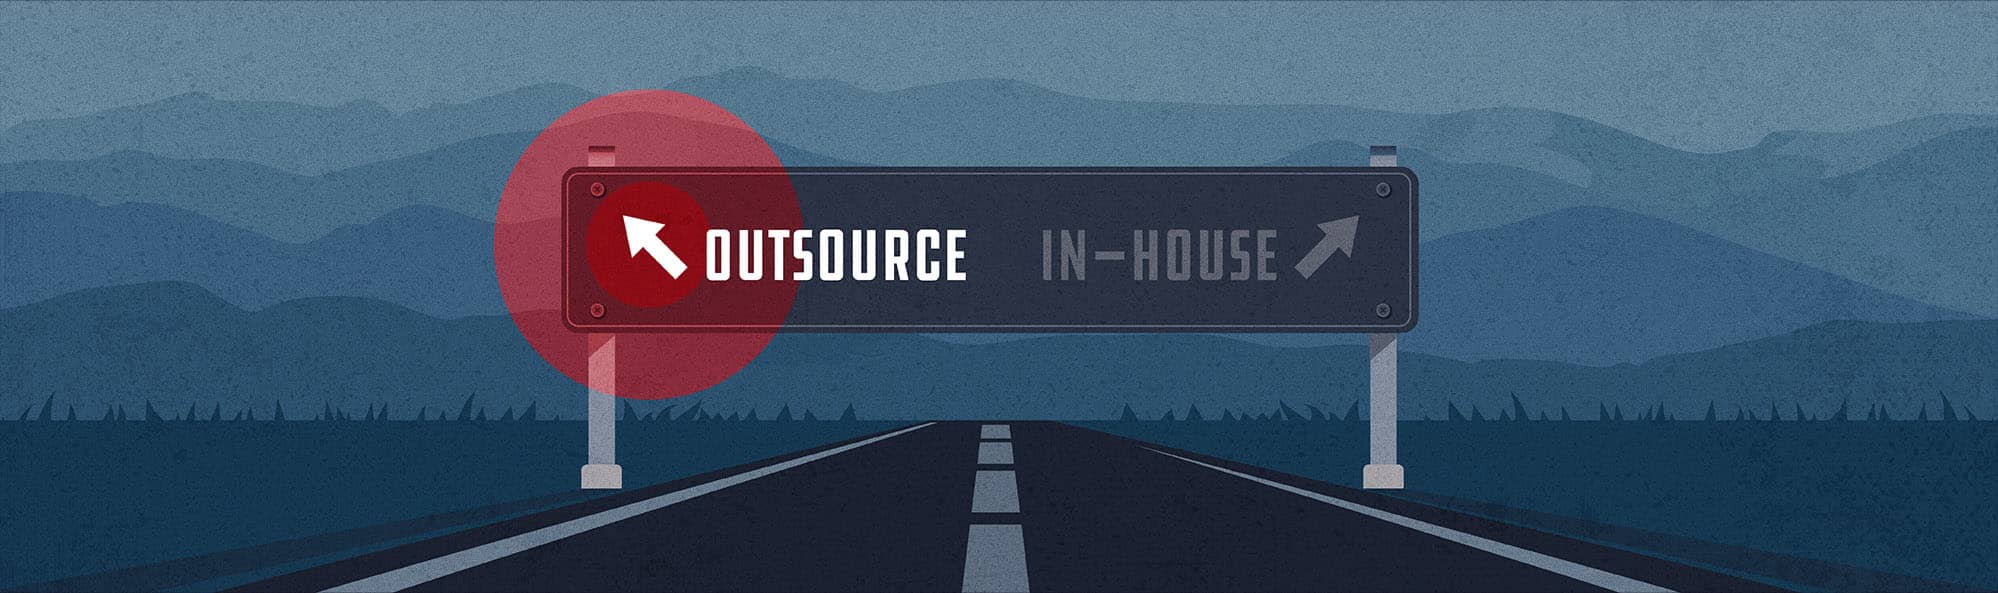 Outsourced! Or, A Guide to Sending Your Fleet Elsewhere